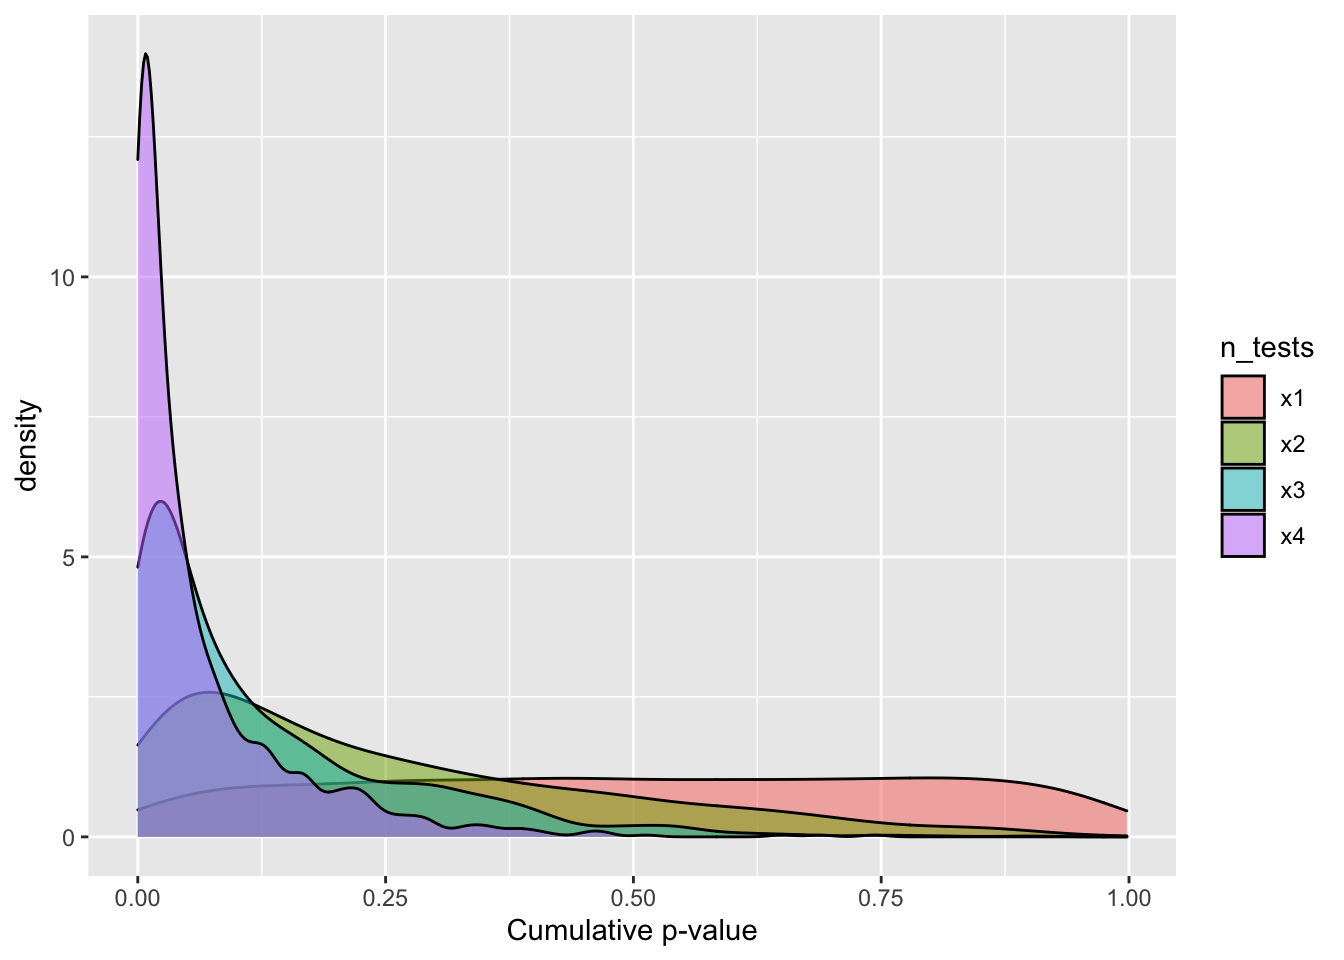 Cumulative p-value distribution under the null hypothesis